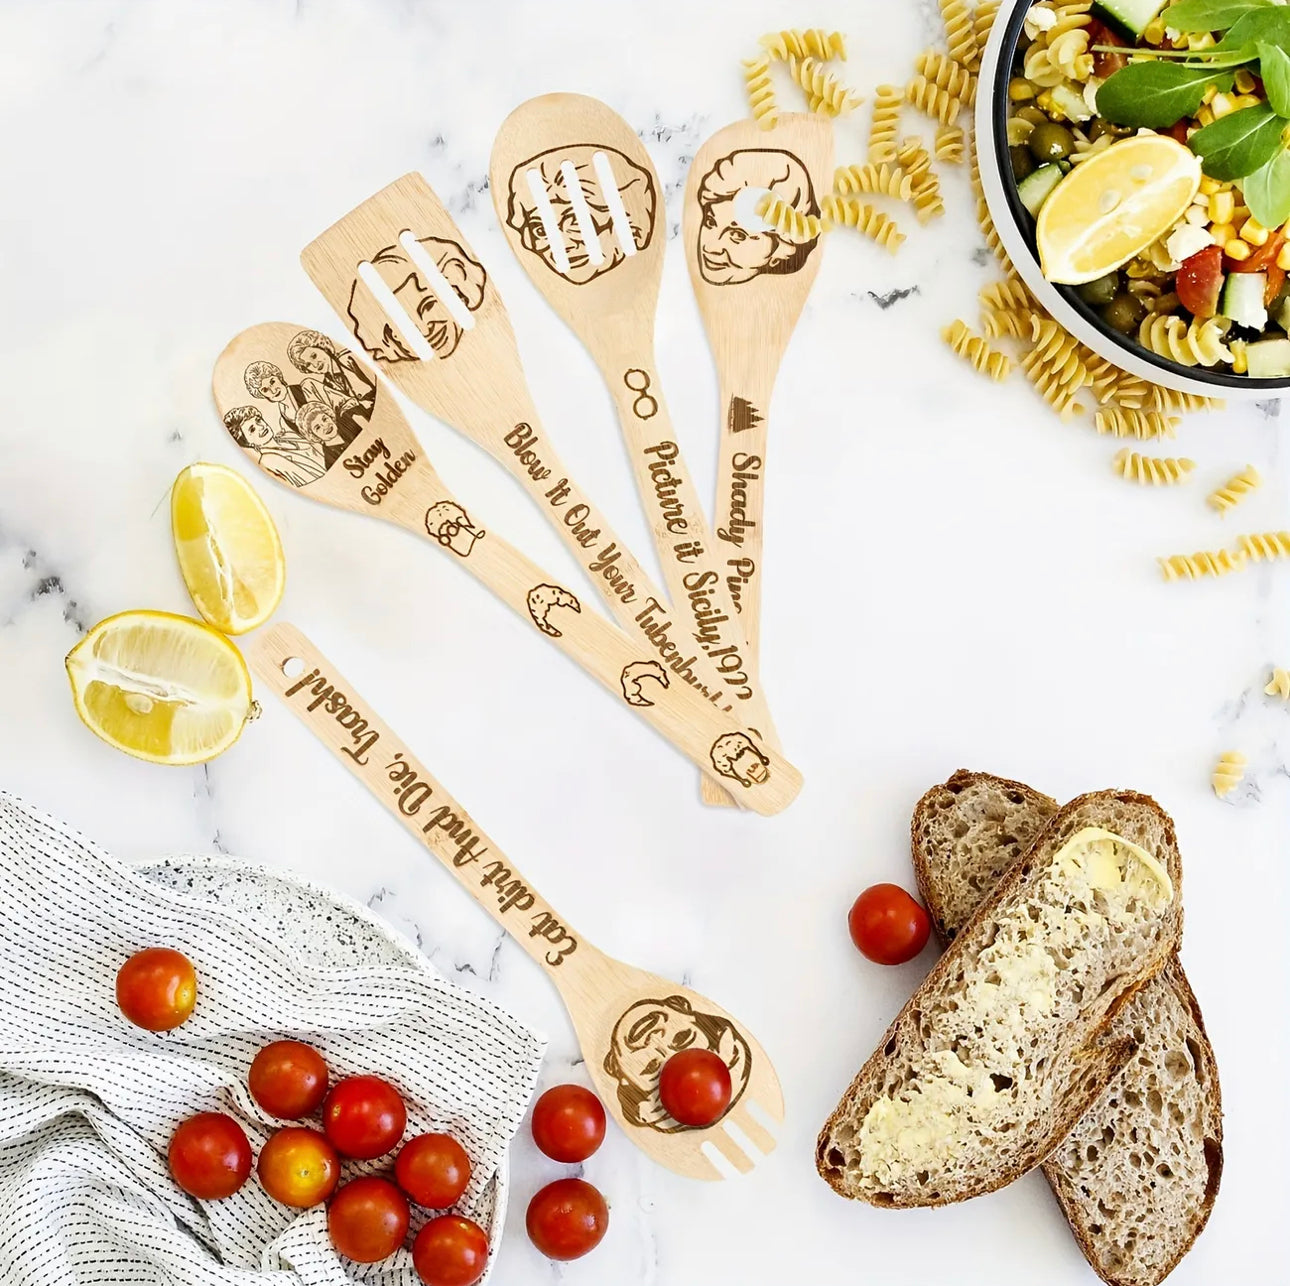 5pcs, Bamboo Ladles, Wooden Spoons Utensils, Bamboo Cooking Utensils Carve Burned Wooden Spoon, Slotted Spatulas, Funny Kitchen Gadgets Non-stick Cookware For Housewarming Gifts, Kitchen Tools, Kitchen Supplies